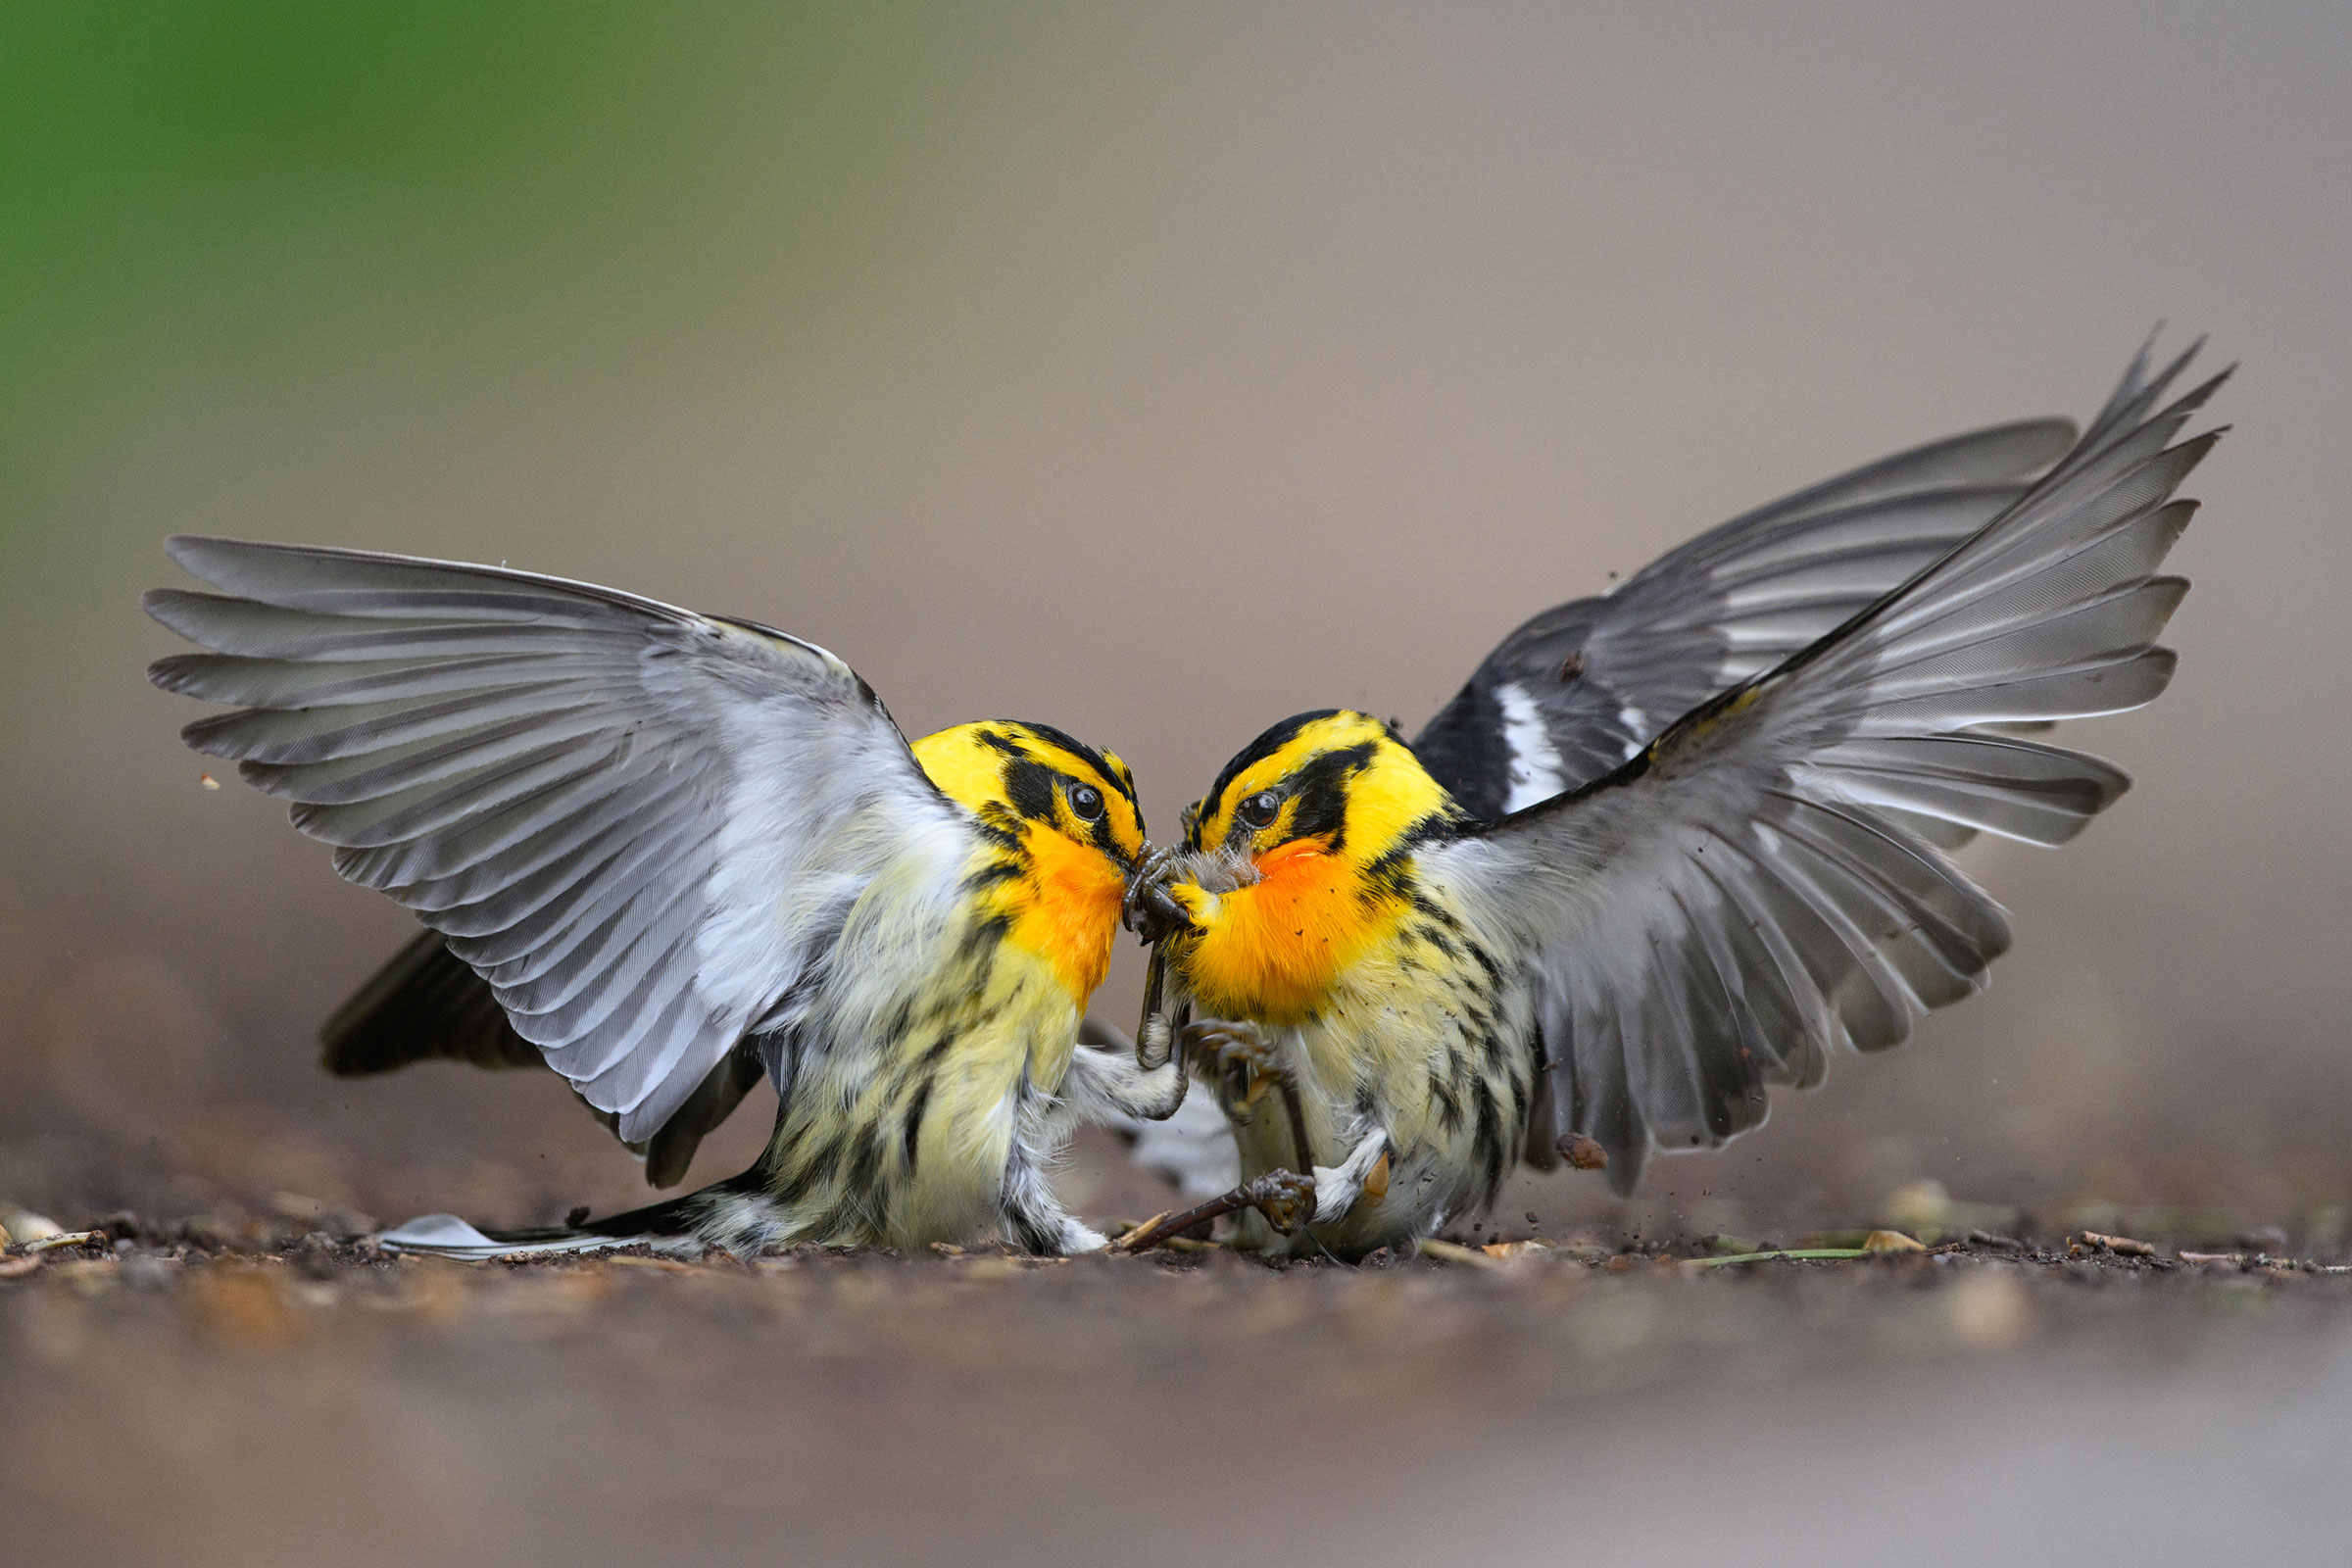 Two Blackburnian Warblers face each other in profile, their gray and white wings outstretched behind them. Their yellow heads and orange necks stand out against a blurred gray background, and their bills and feet are entangled.